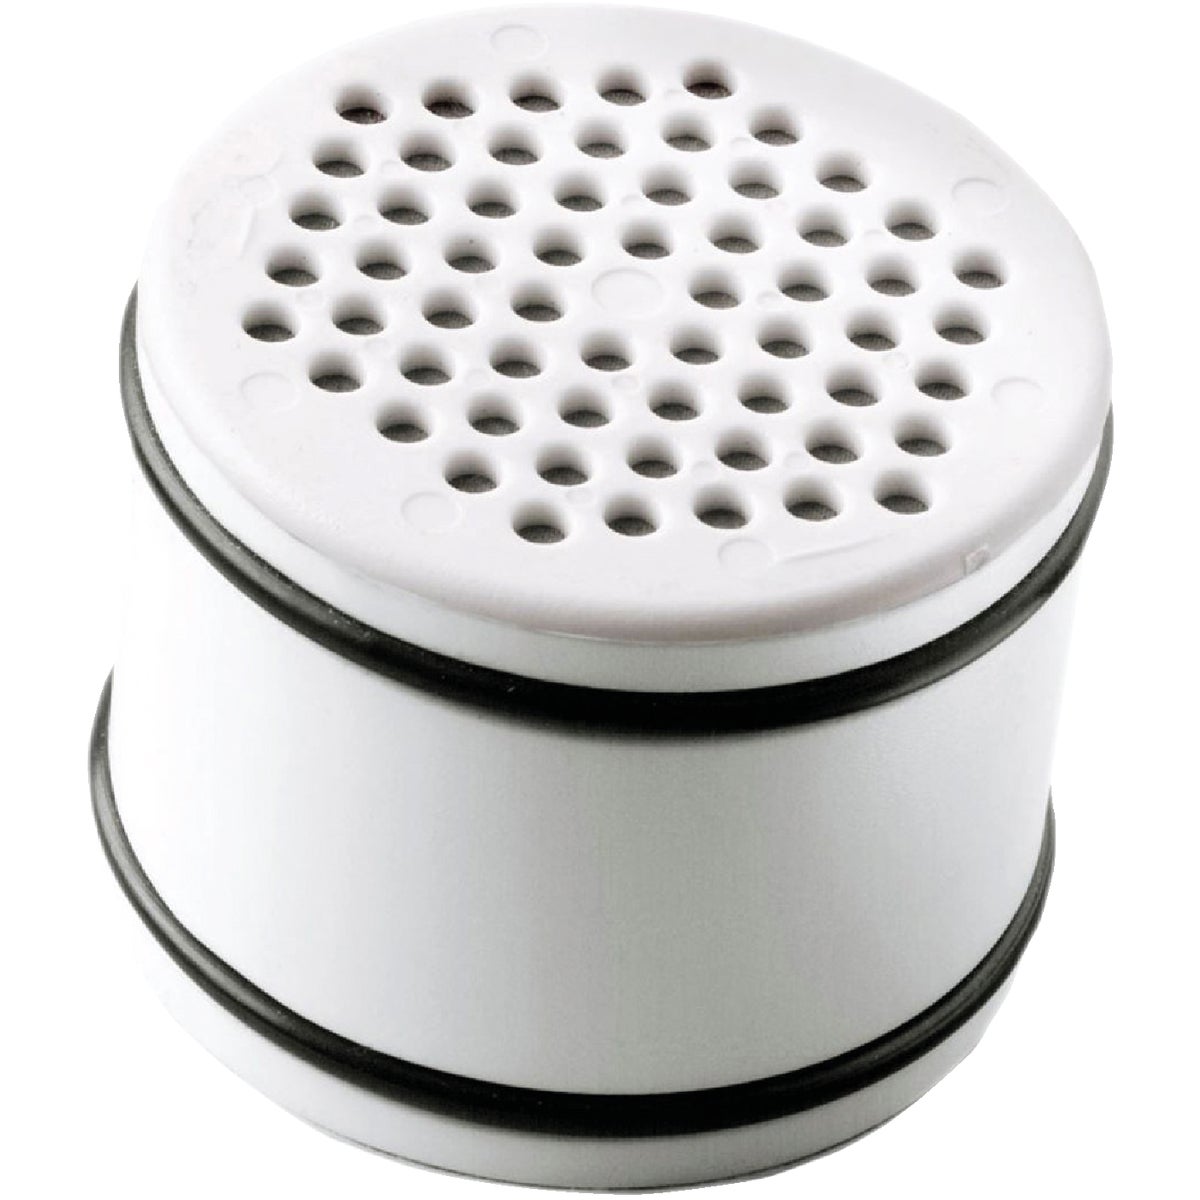 Item 412783, Replacement cartridge filter reduces sulfur odor and 99% chlorine and scale